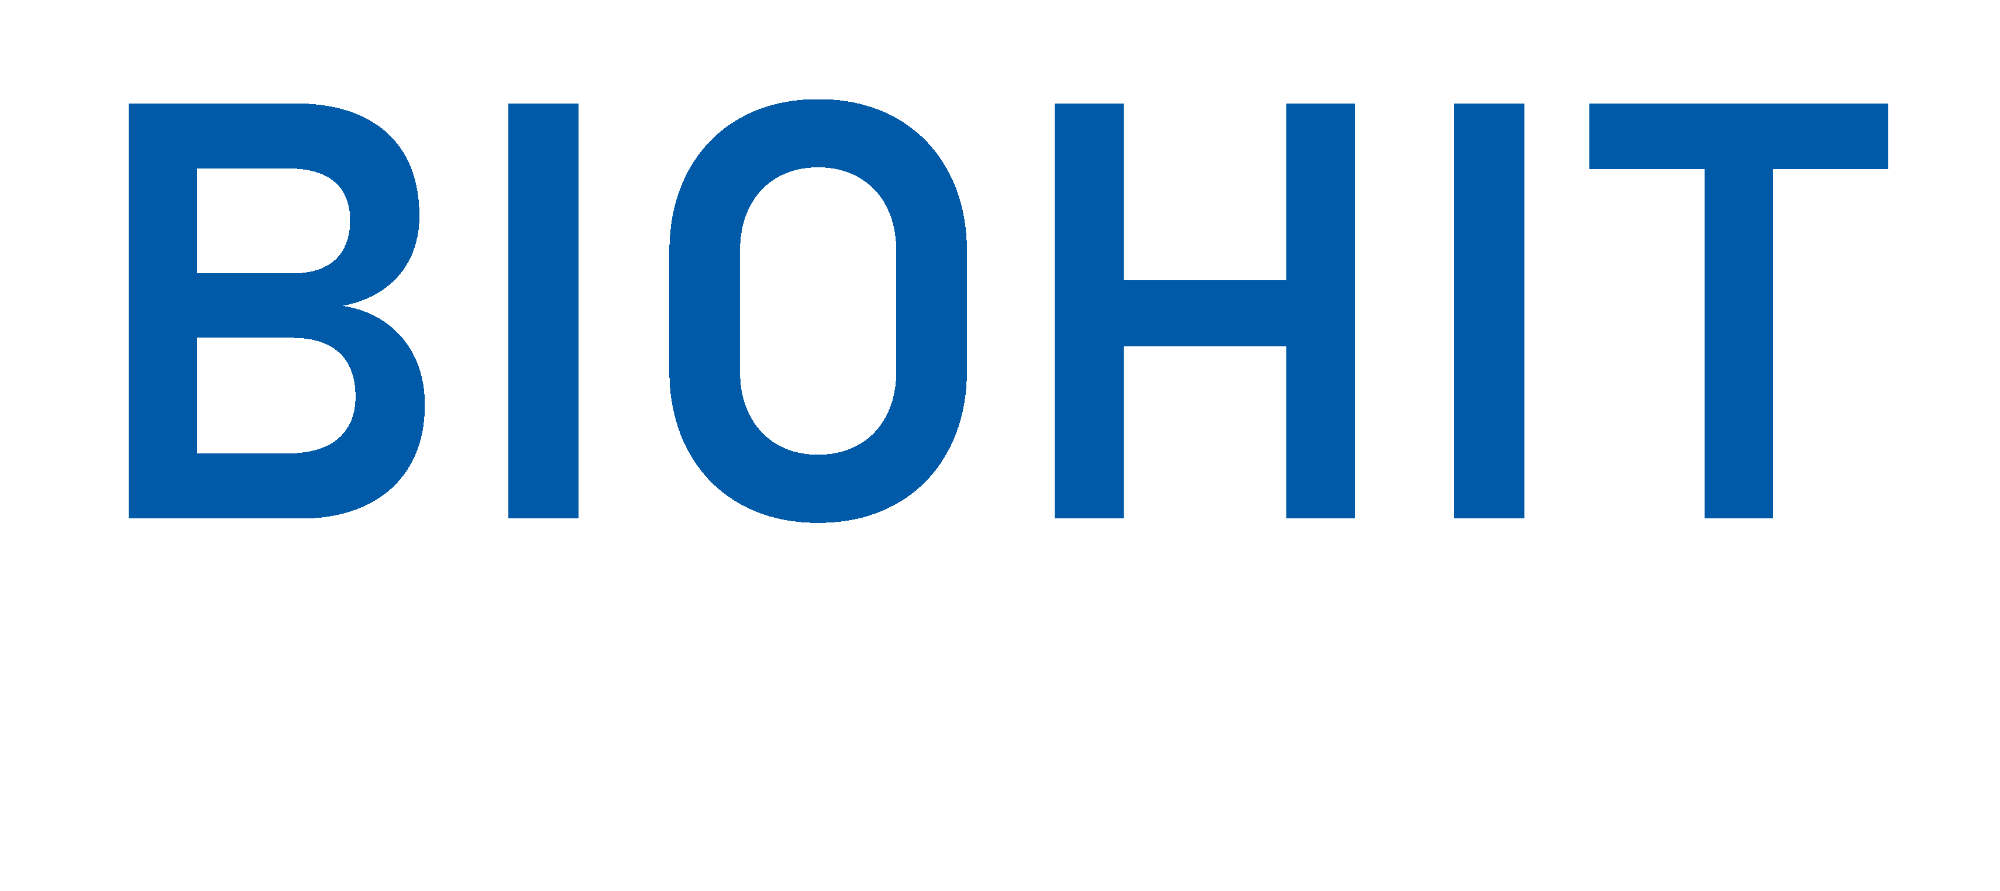 https://inderes-ir-pages-dev-assets.storage.googleapis.com/biohithealthcare/images/BIOHIT_logo_blue_and_white_cropped-optimized.png